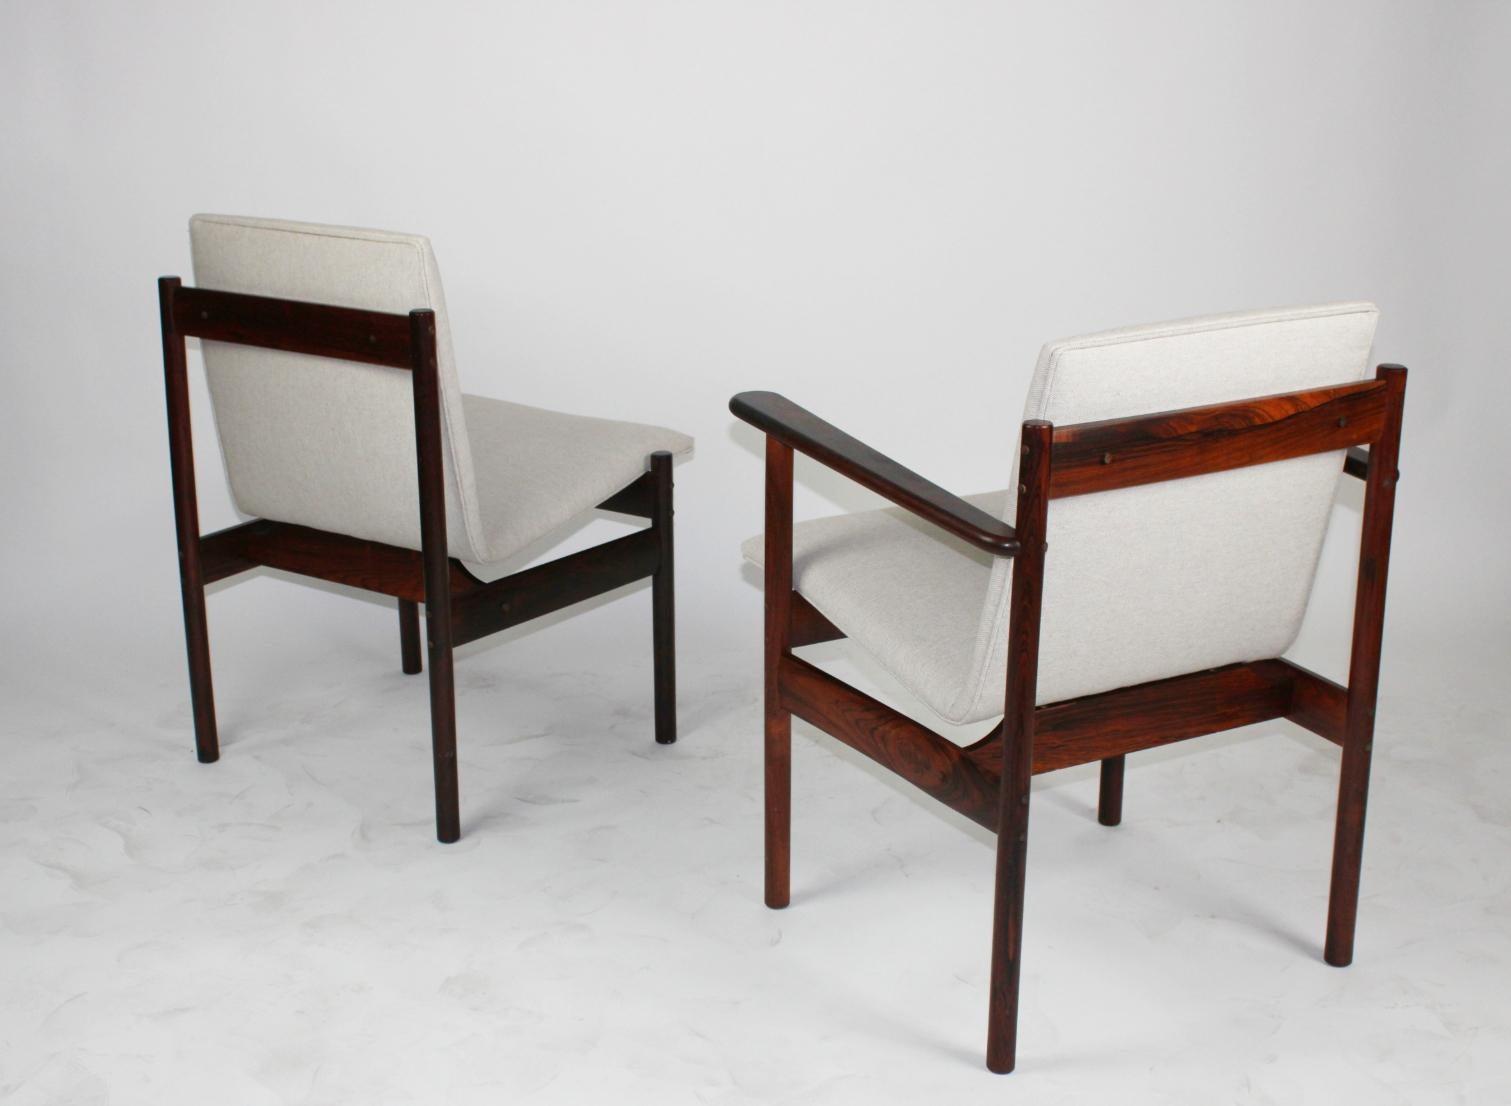 Stunning rosewood chairs with scoop seating newly upholstered in cream color cotton.
Set includes 2 captain chairs and 2 sides. circa 1960s.
Sold as a set of 4.